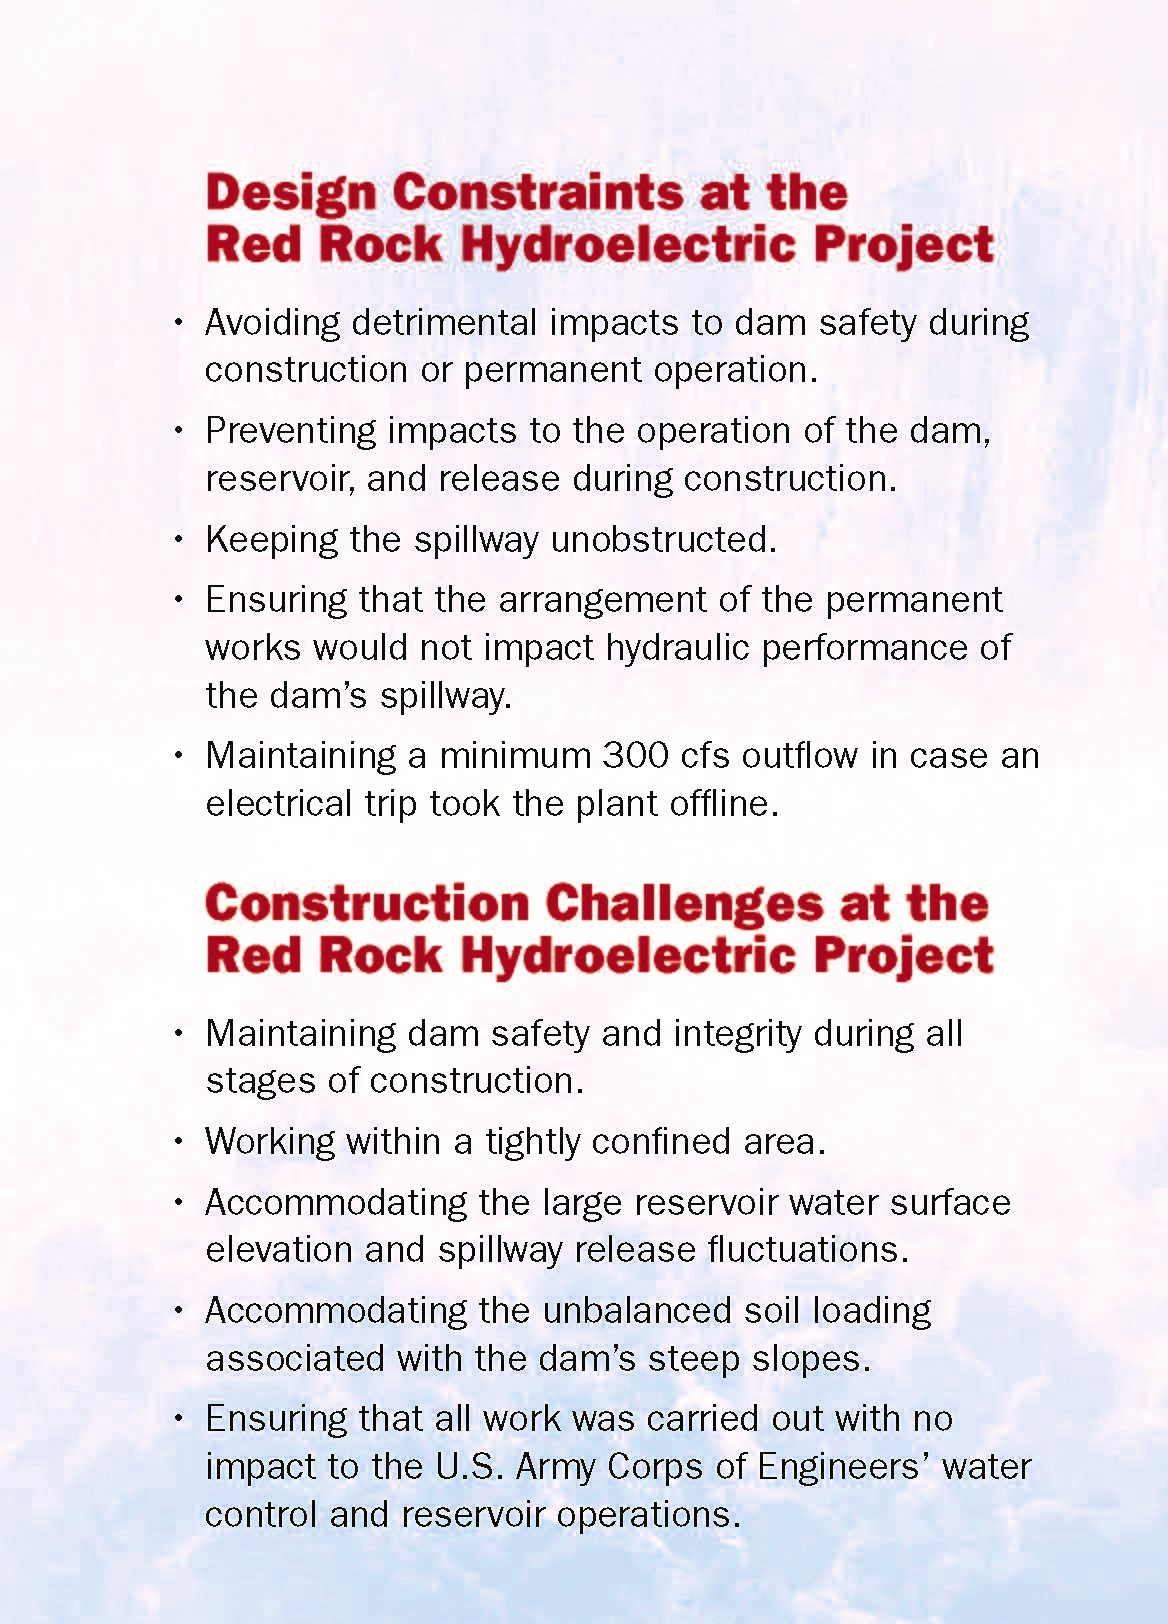 list of design constraints and challenges at red rock dam